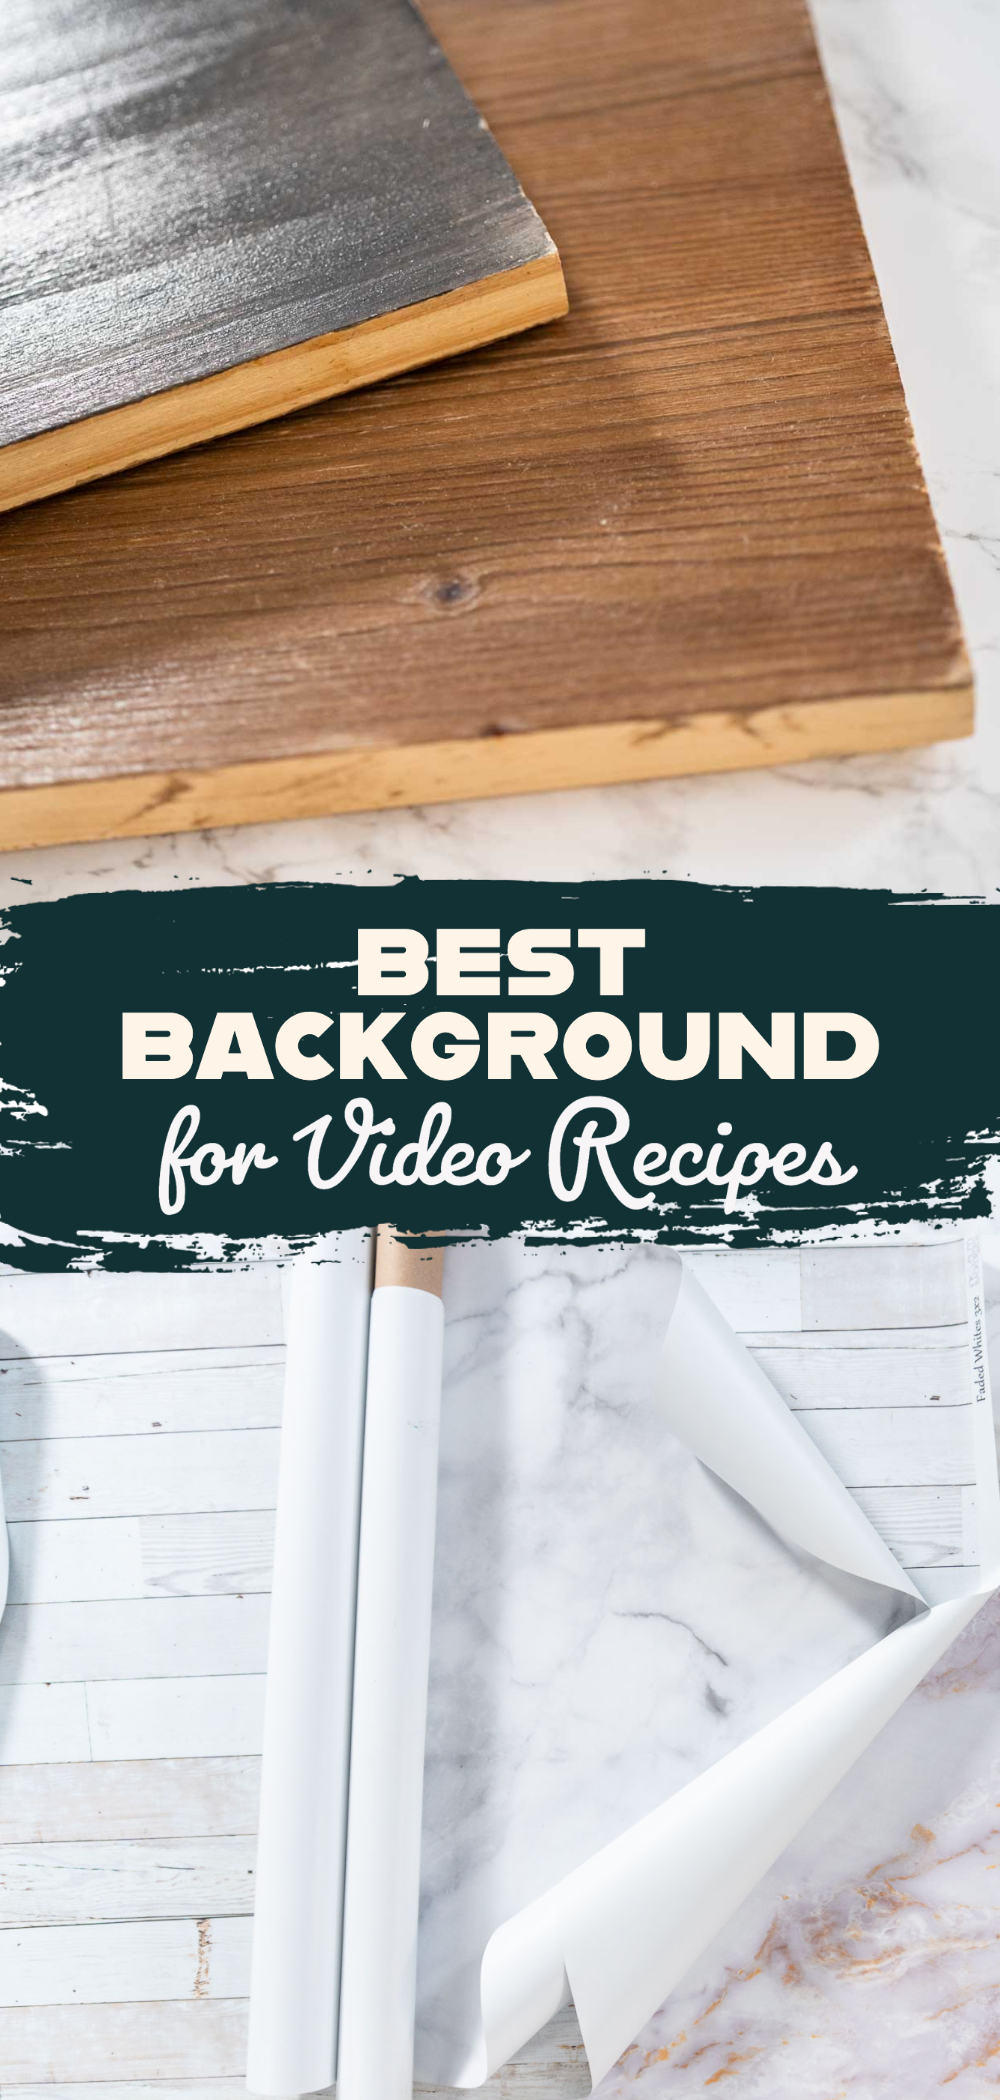 Best Background for Video Recipes